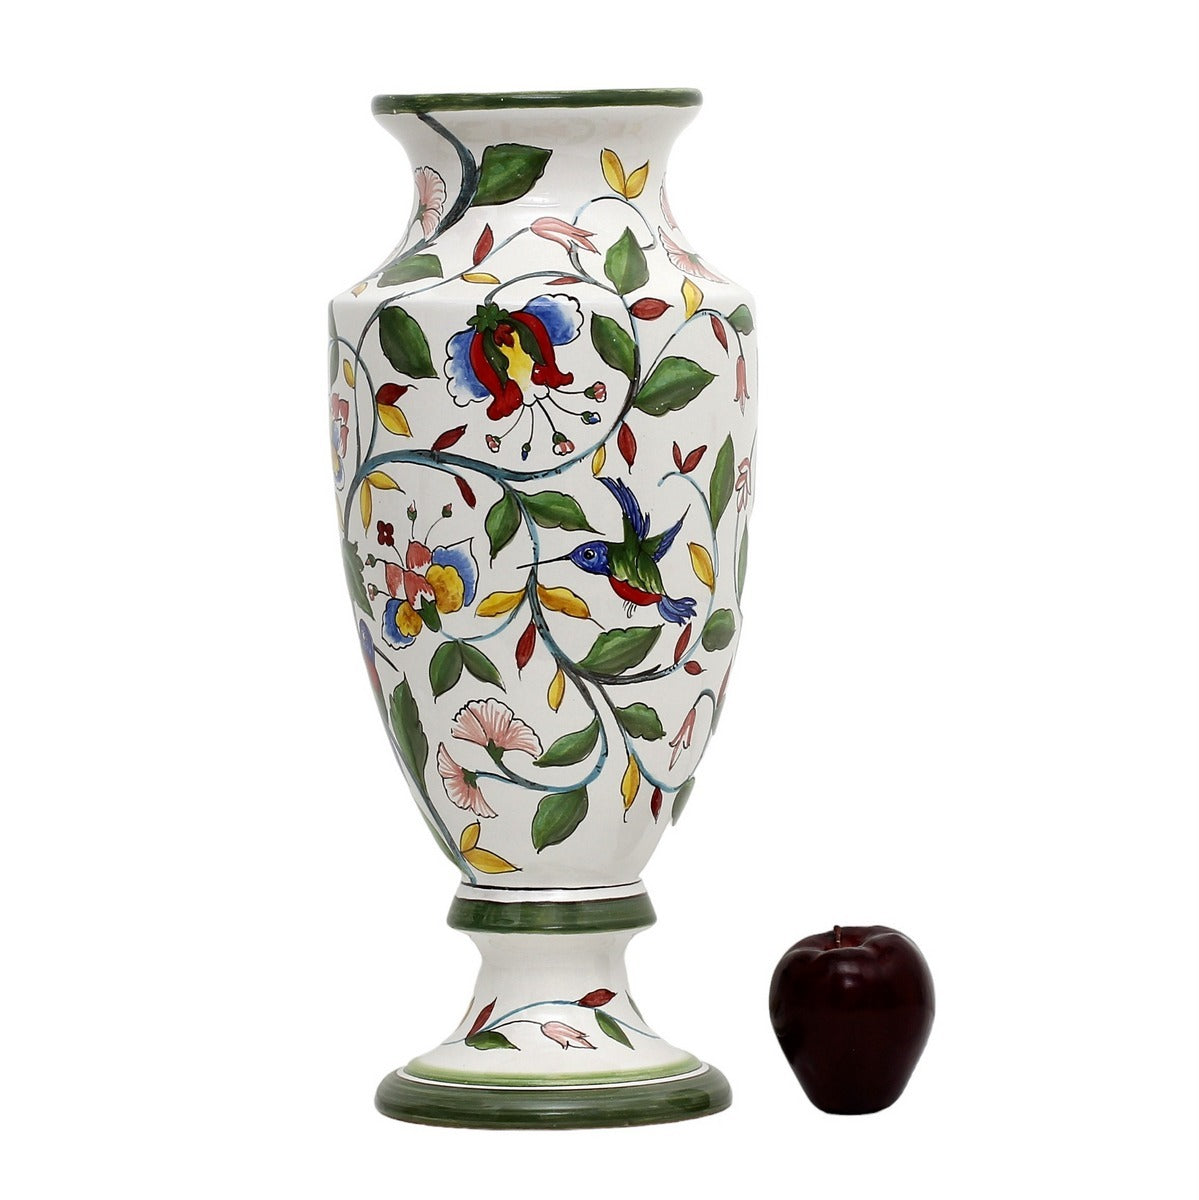 DERUTA FLORIANA: Tall footed Art Deco vase hand painted decorated in a floral design with hummingbird.